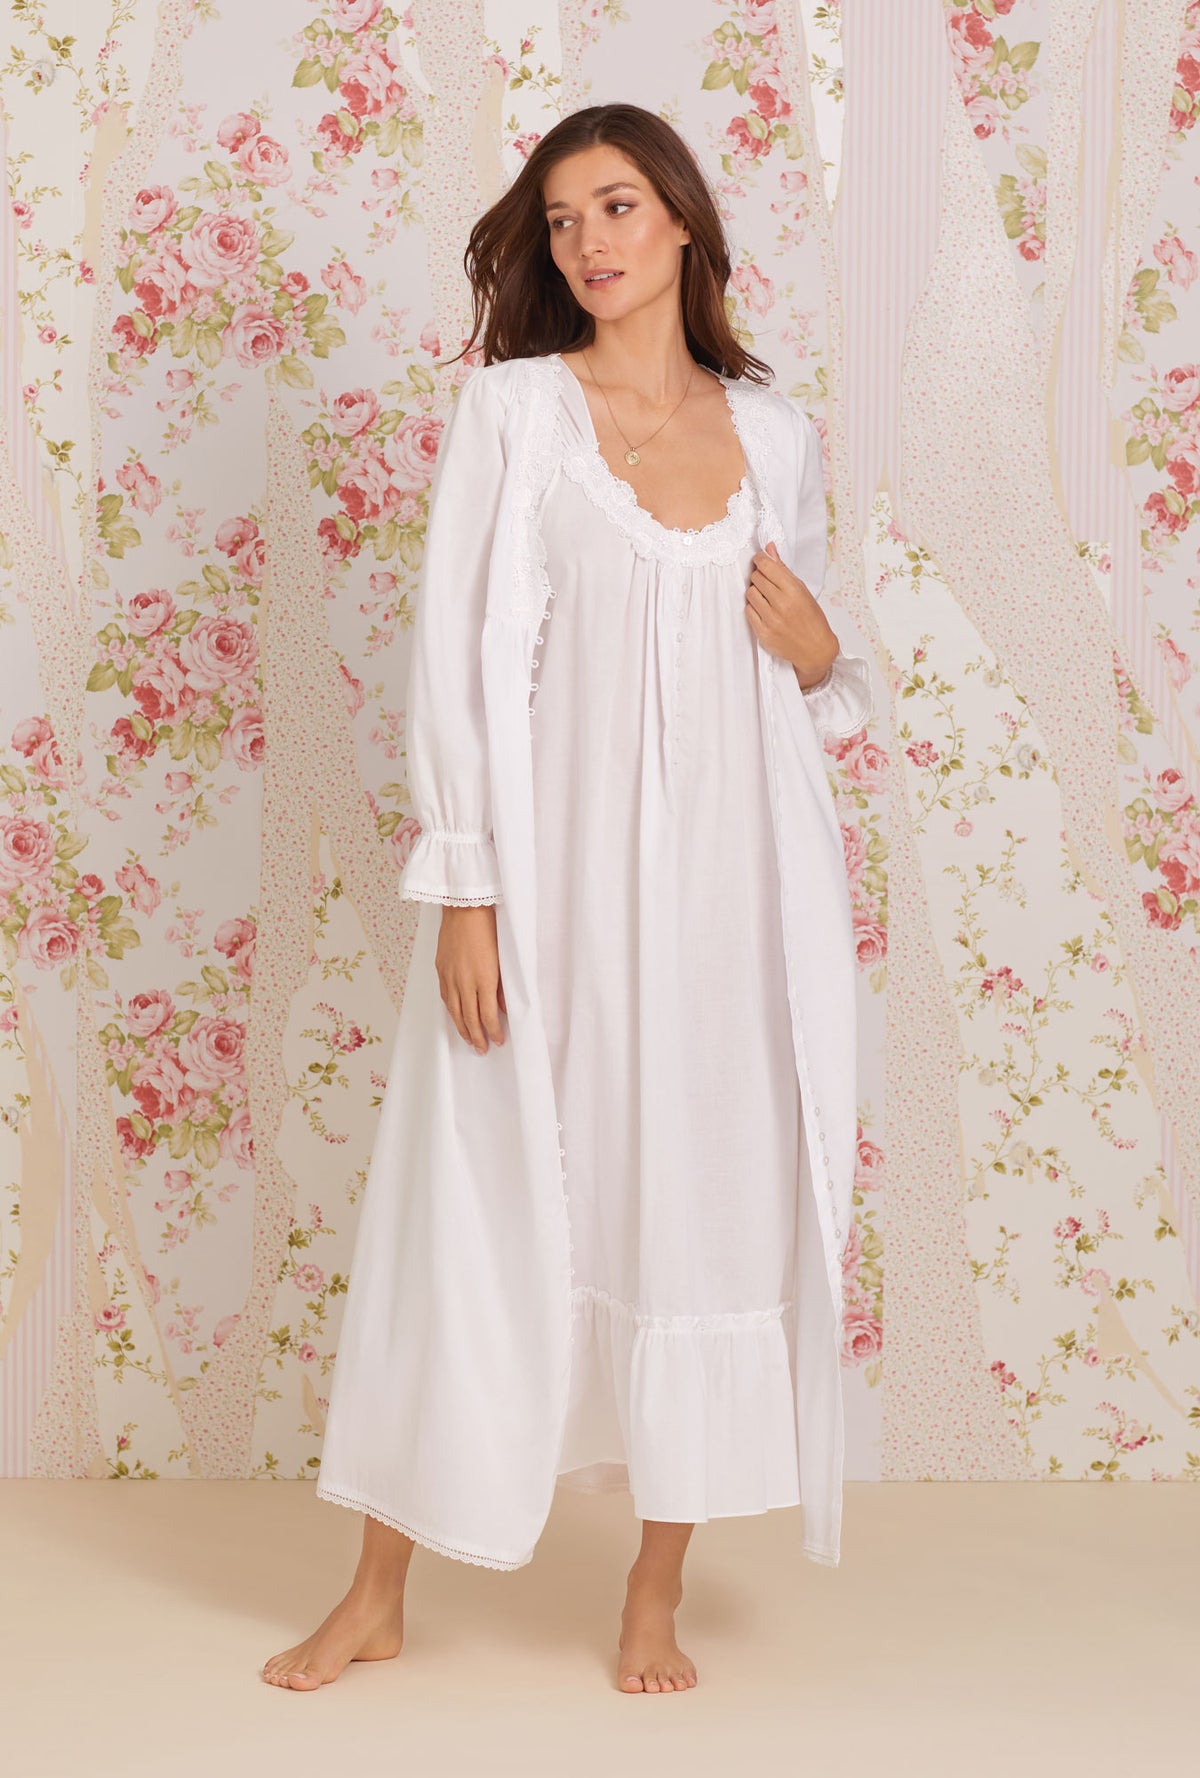 A lady wearing white Long Sleeve Cotton Button Front Robe with Calla Lily print